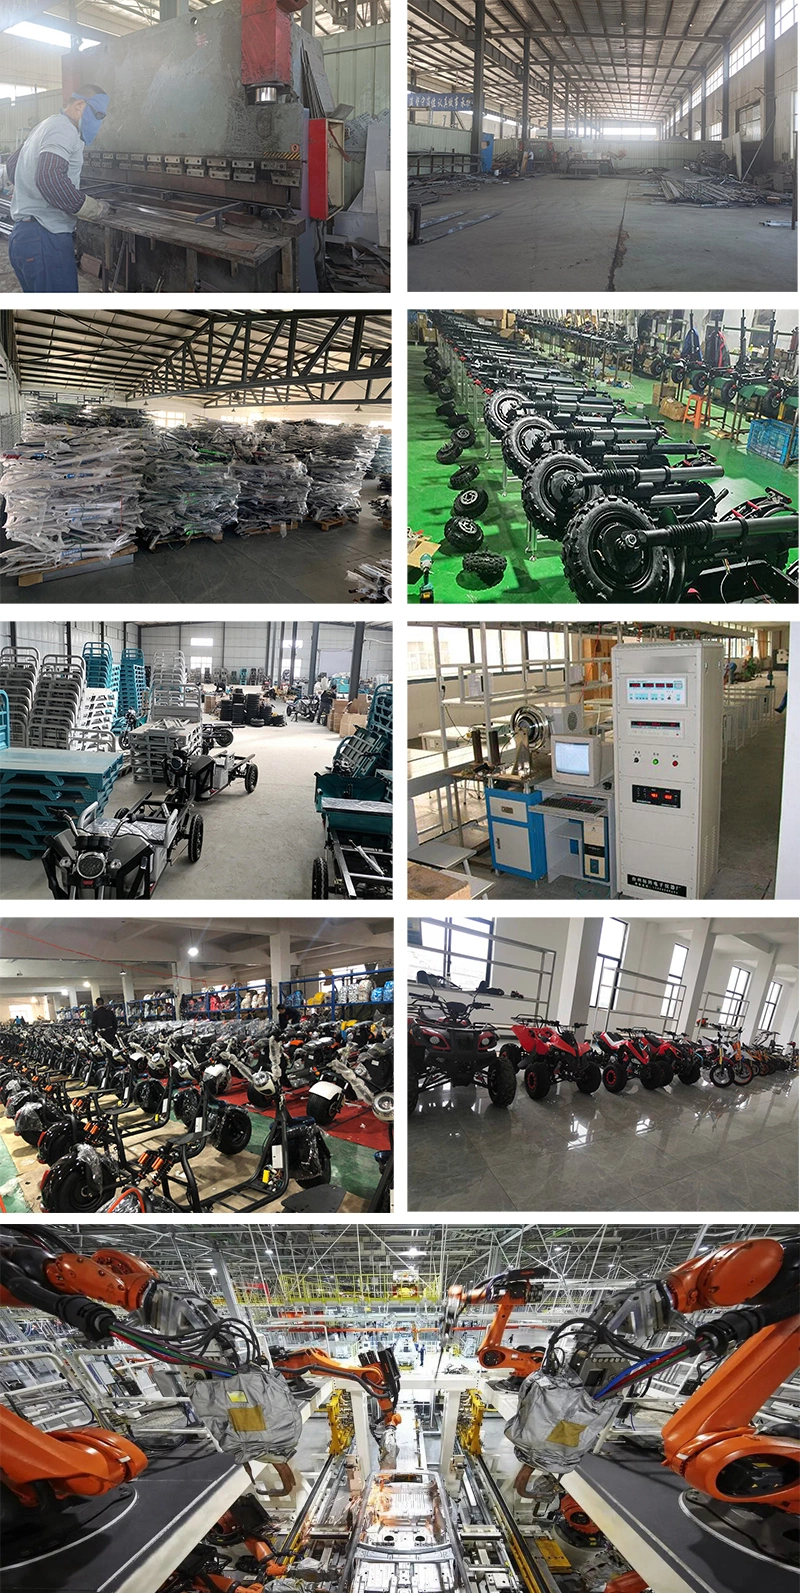 Scooter for Adults 2000W Battery Adult Bike 3 Wheel Fast Golf Fat Tire Elderly Mobility Motor 3000W 60V 20ah Electric Bicycle